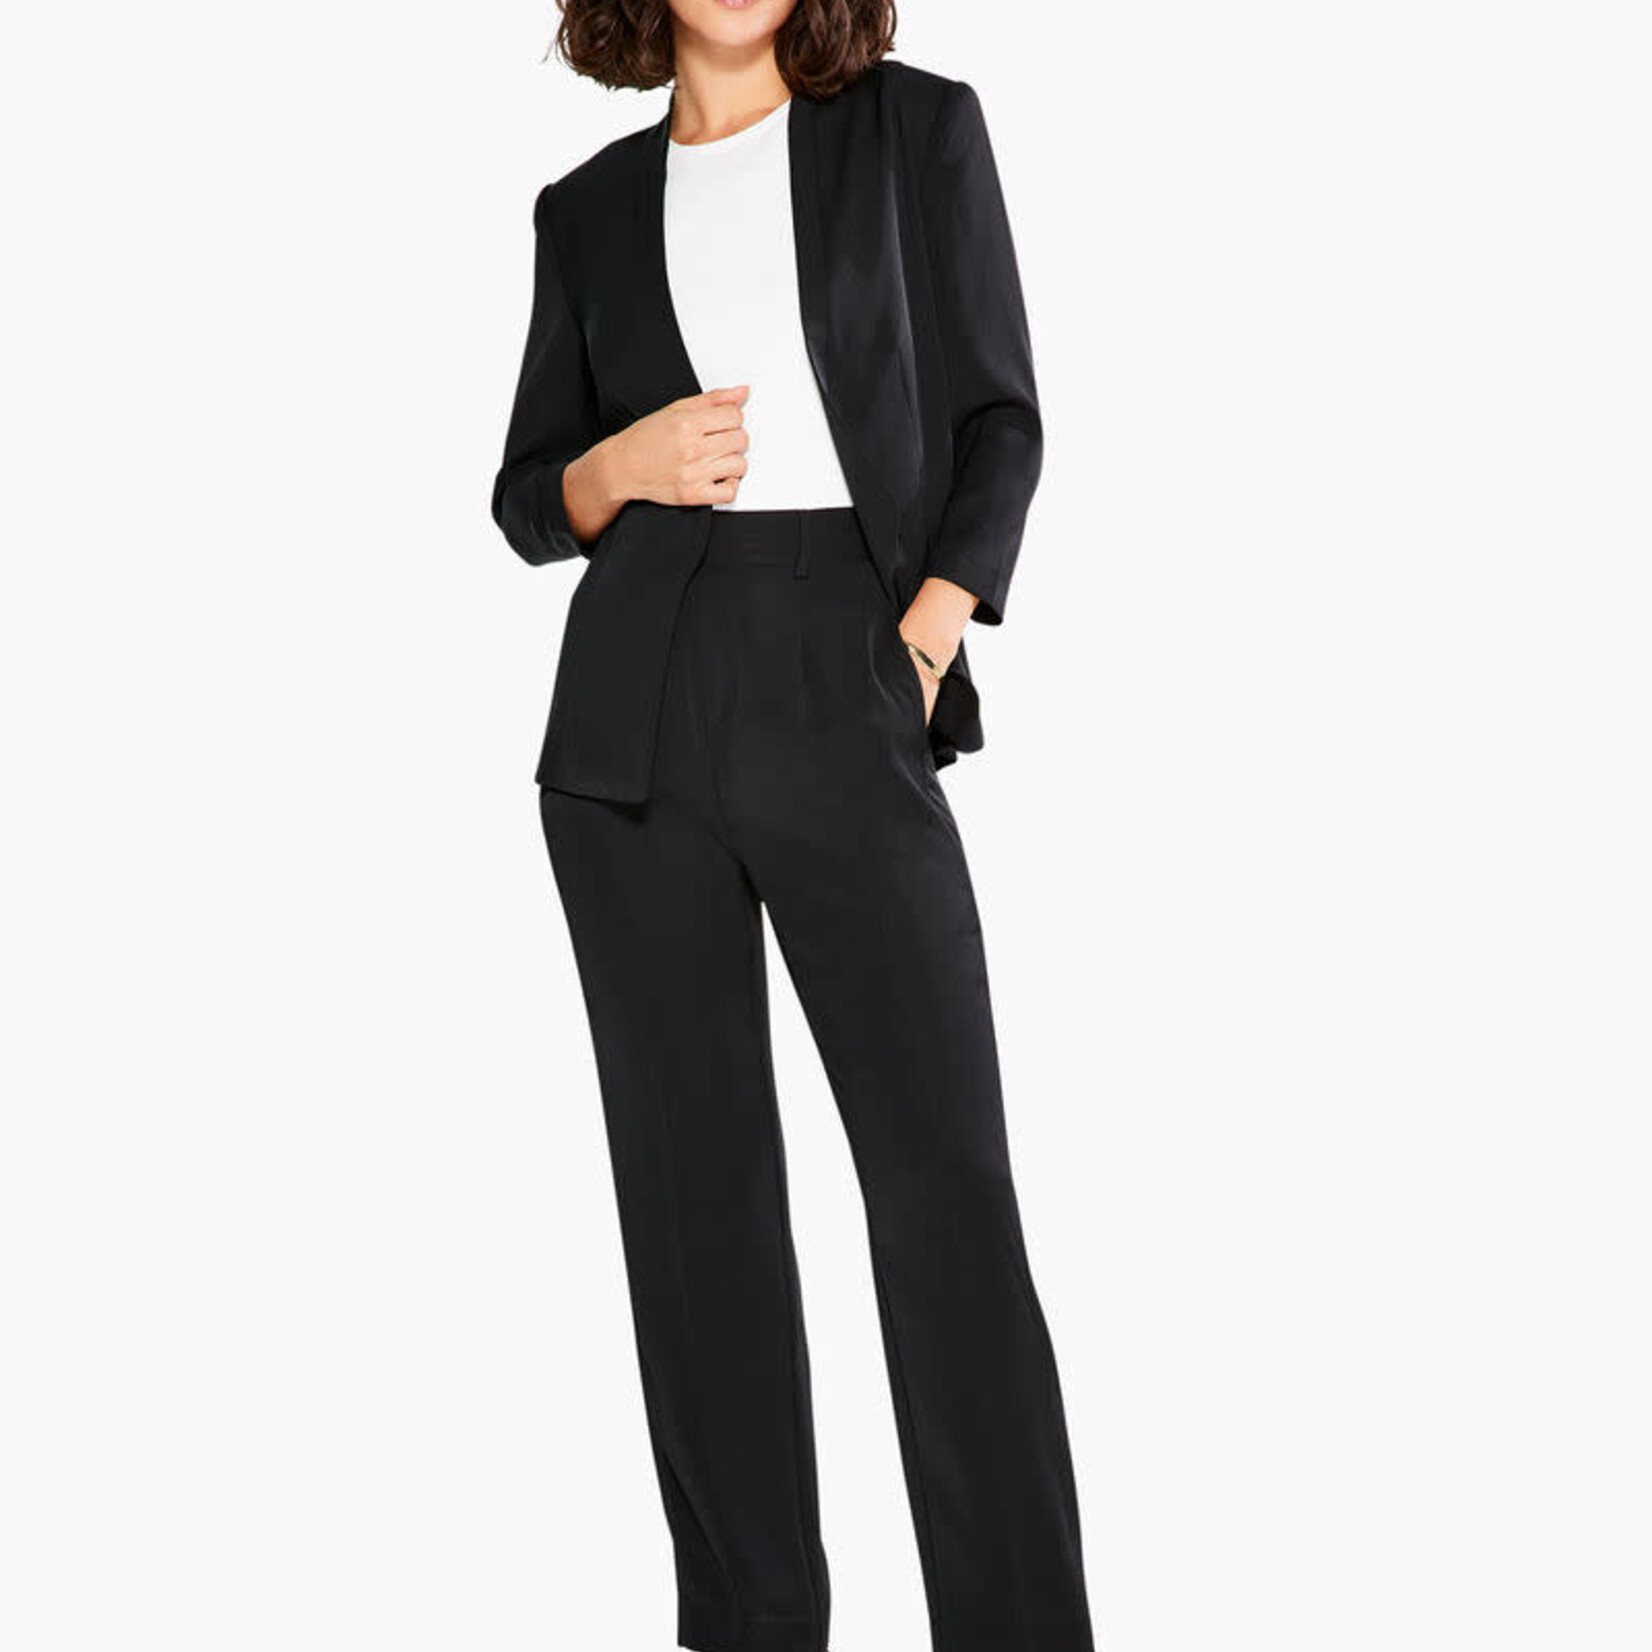 Nic + Zoe Smart Look Relaxed Trouser